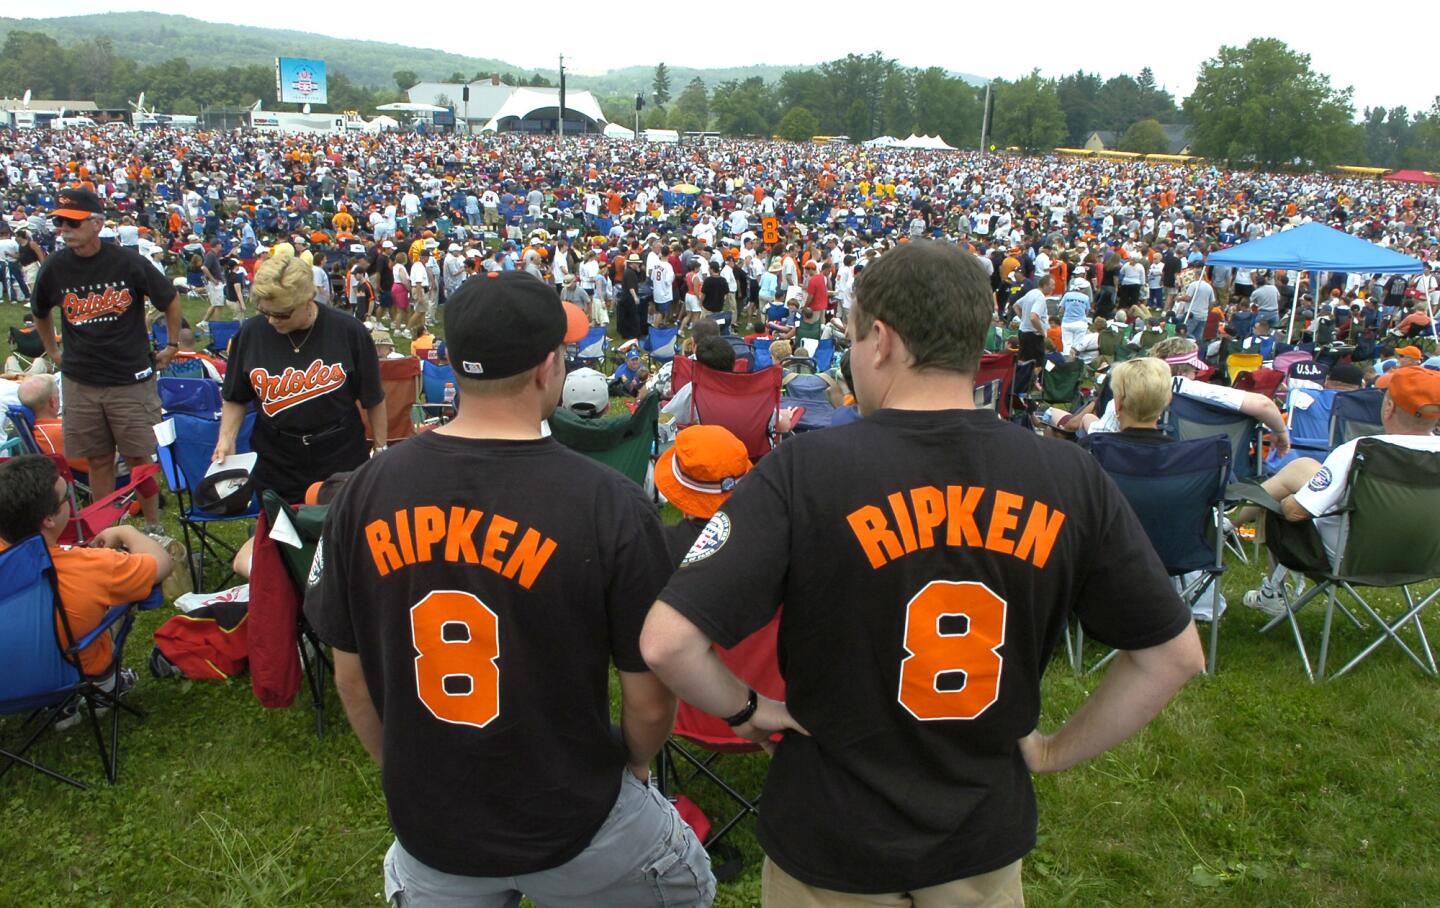 The largest crowd in Hall of Fame history gathered to watch the Baseball Hall of Fame induction of Cal Ripken Jr and Tony Gwynn.